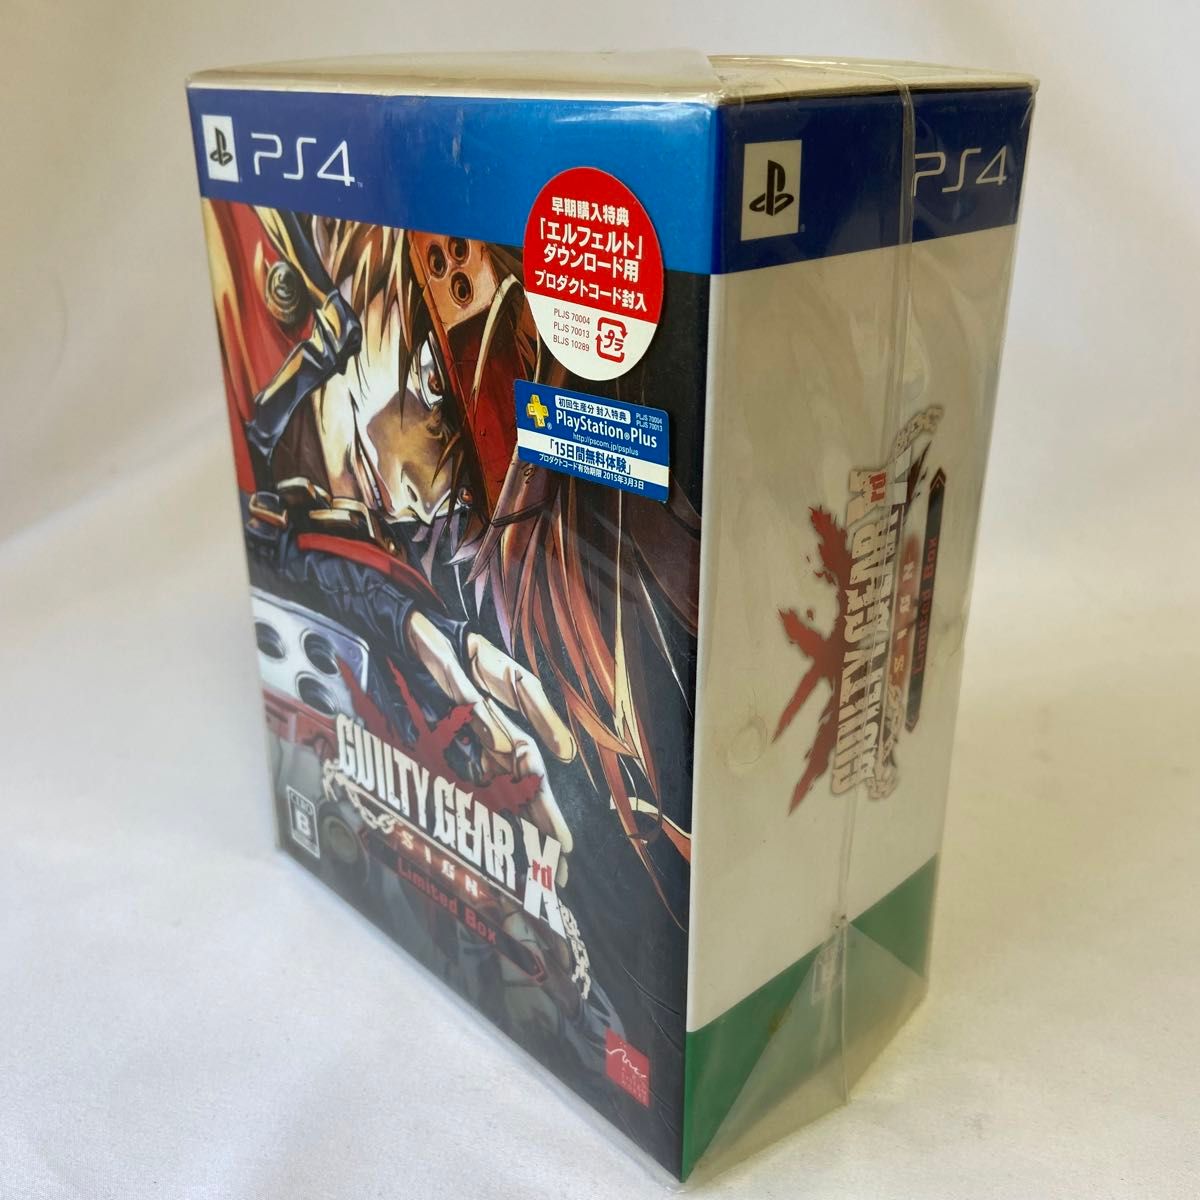 PS4ソフト GUILTY GEAR Xrd limited box 新品未使用　シュリンク付き